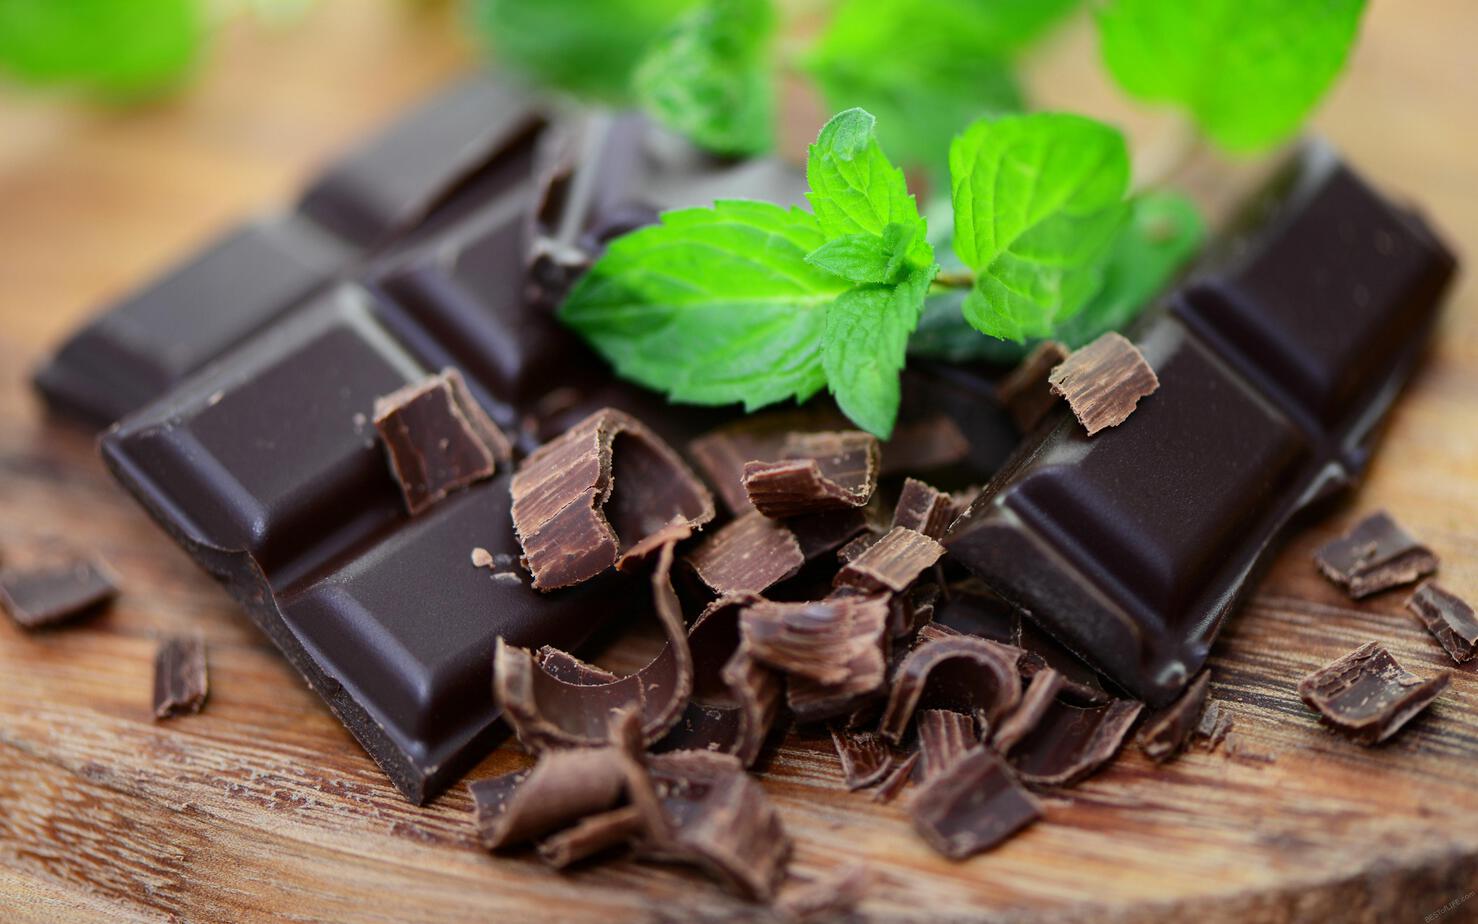 By knowing the health benefits of chocolate you can enjoy sweets in combination with a healthy lifestyle. Everything in moderation, right? #chocolate #health #healthtips #healthyliving #healthylifestyle #nutrition #nutritiontips